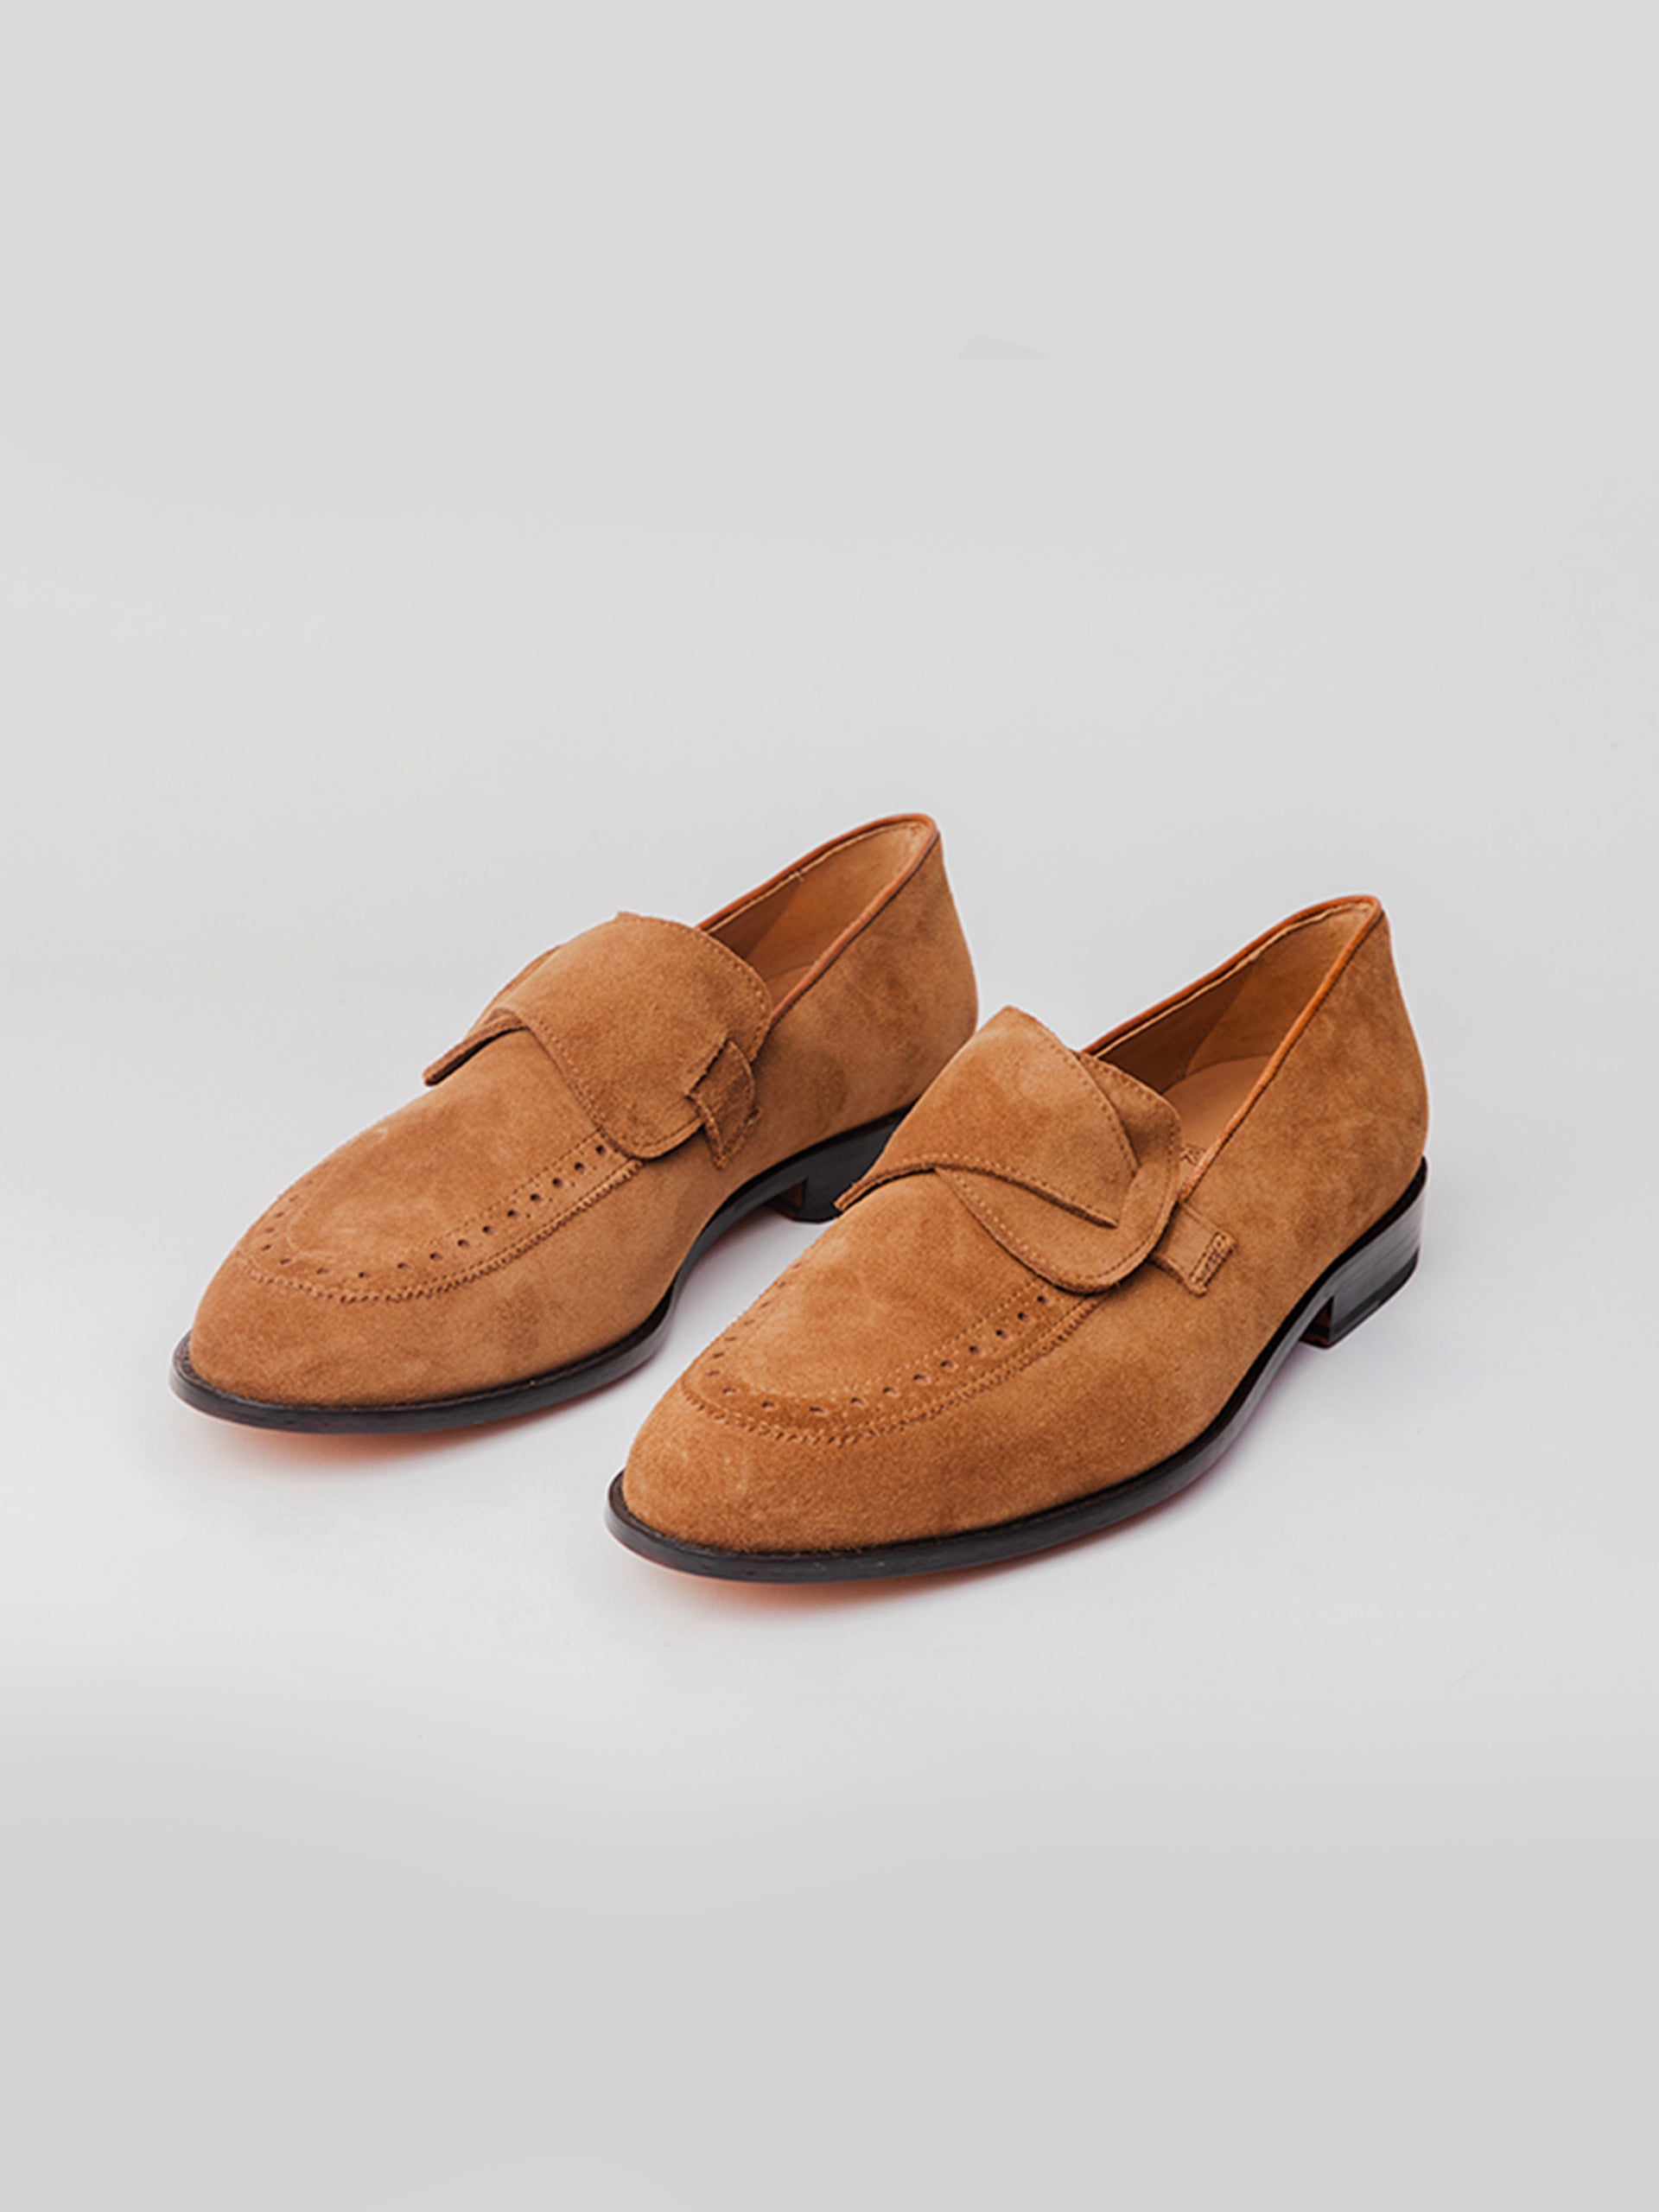 Buy Best Loafers For Men | Suede Loafer | Rawls Luxure